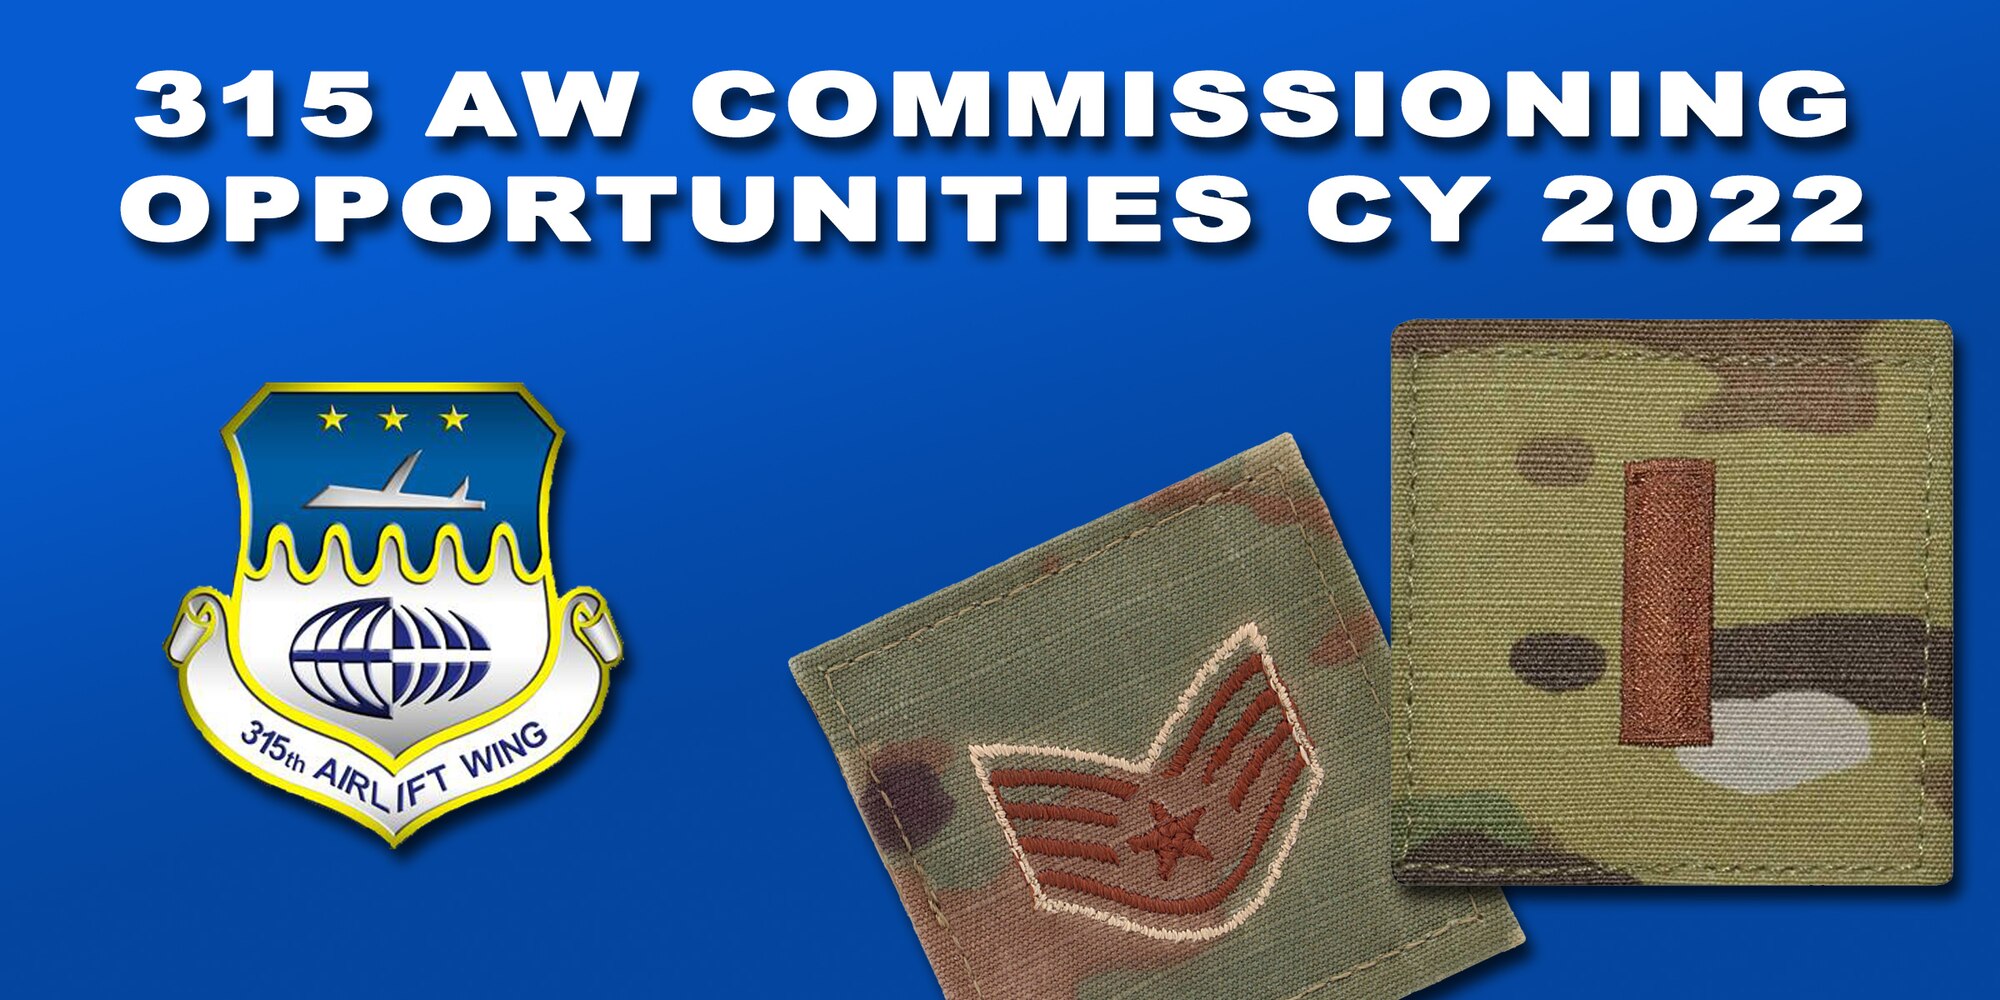 Commissioning opportunities